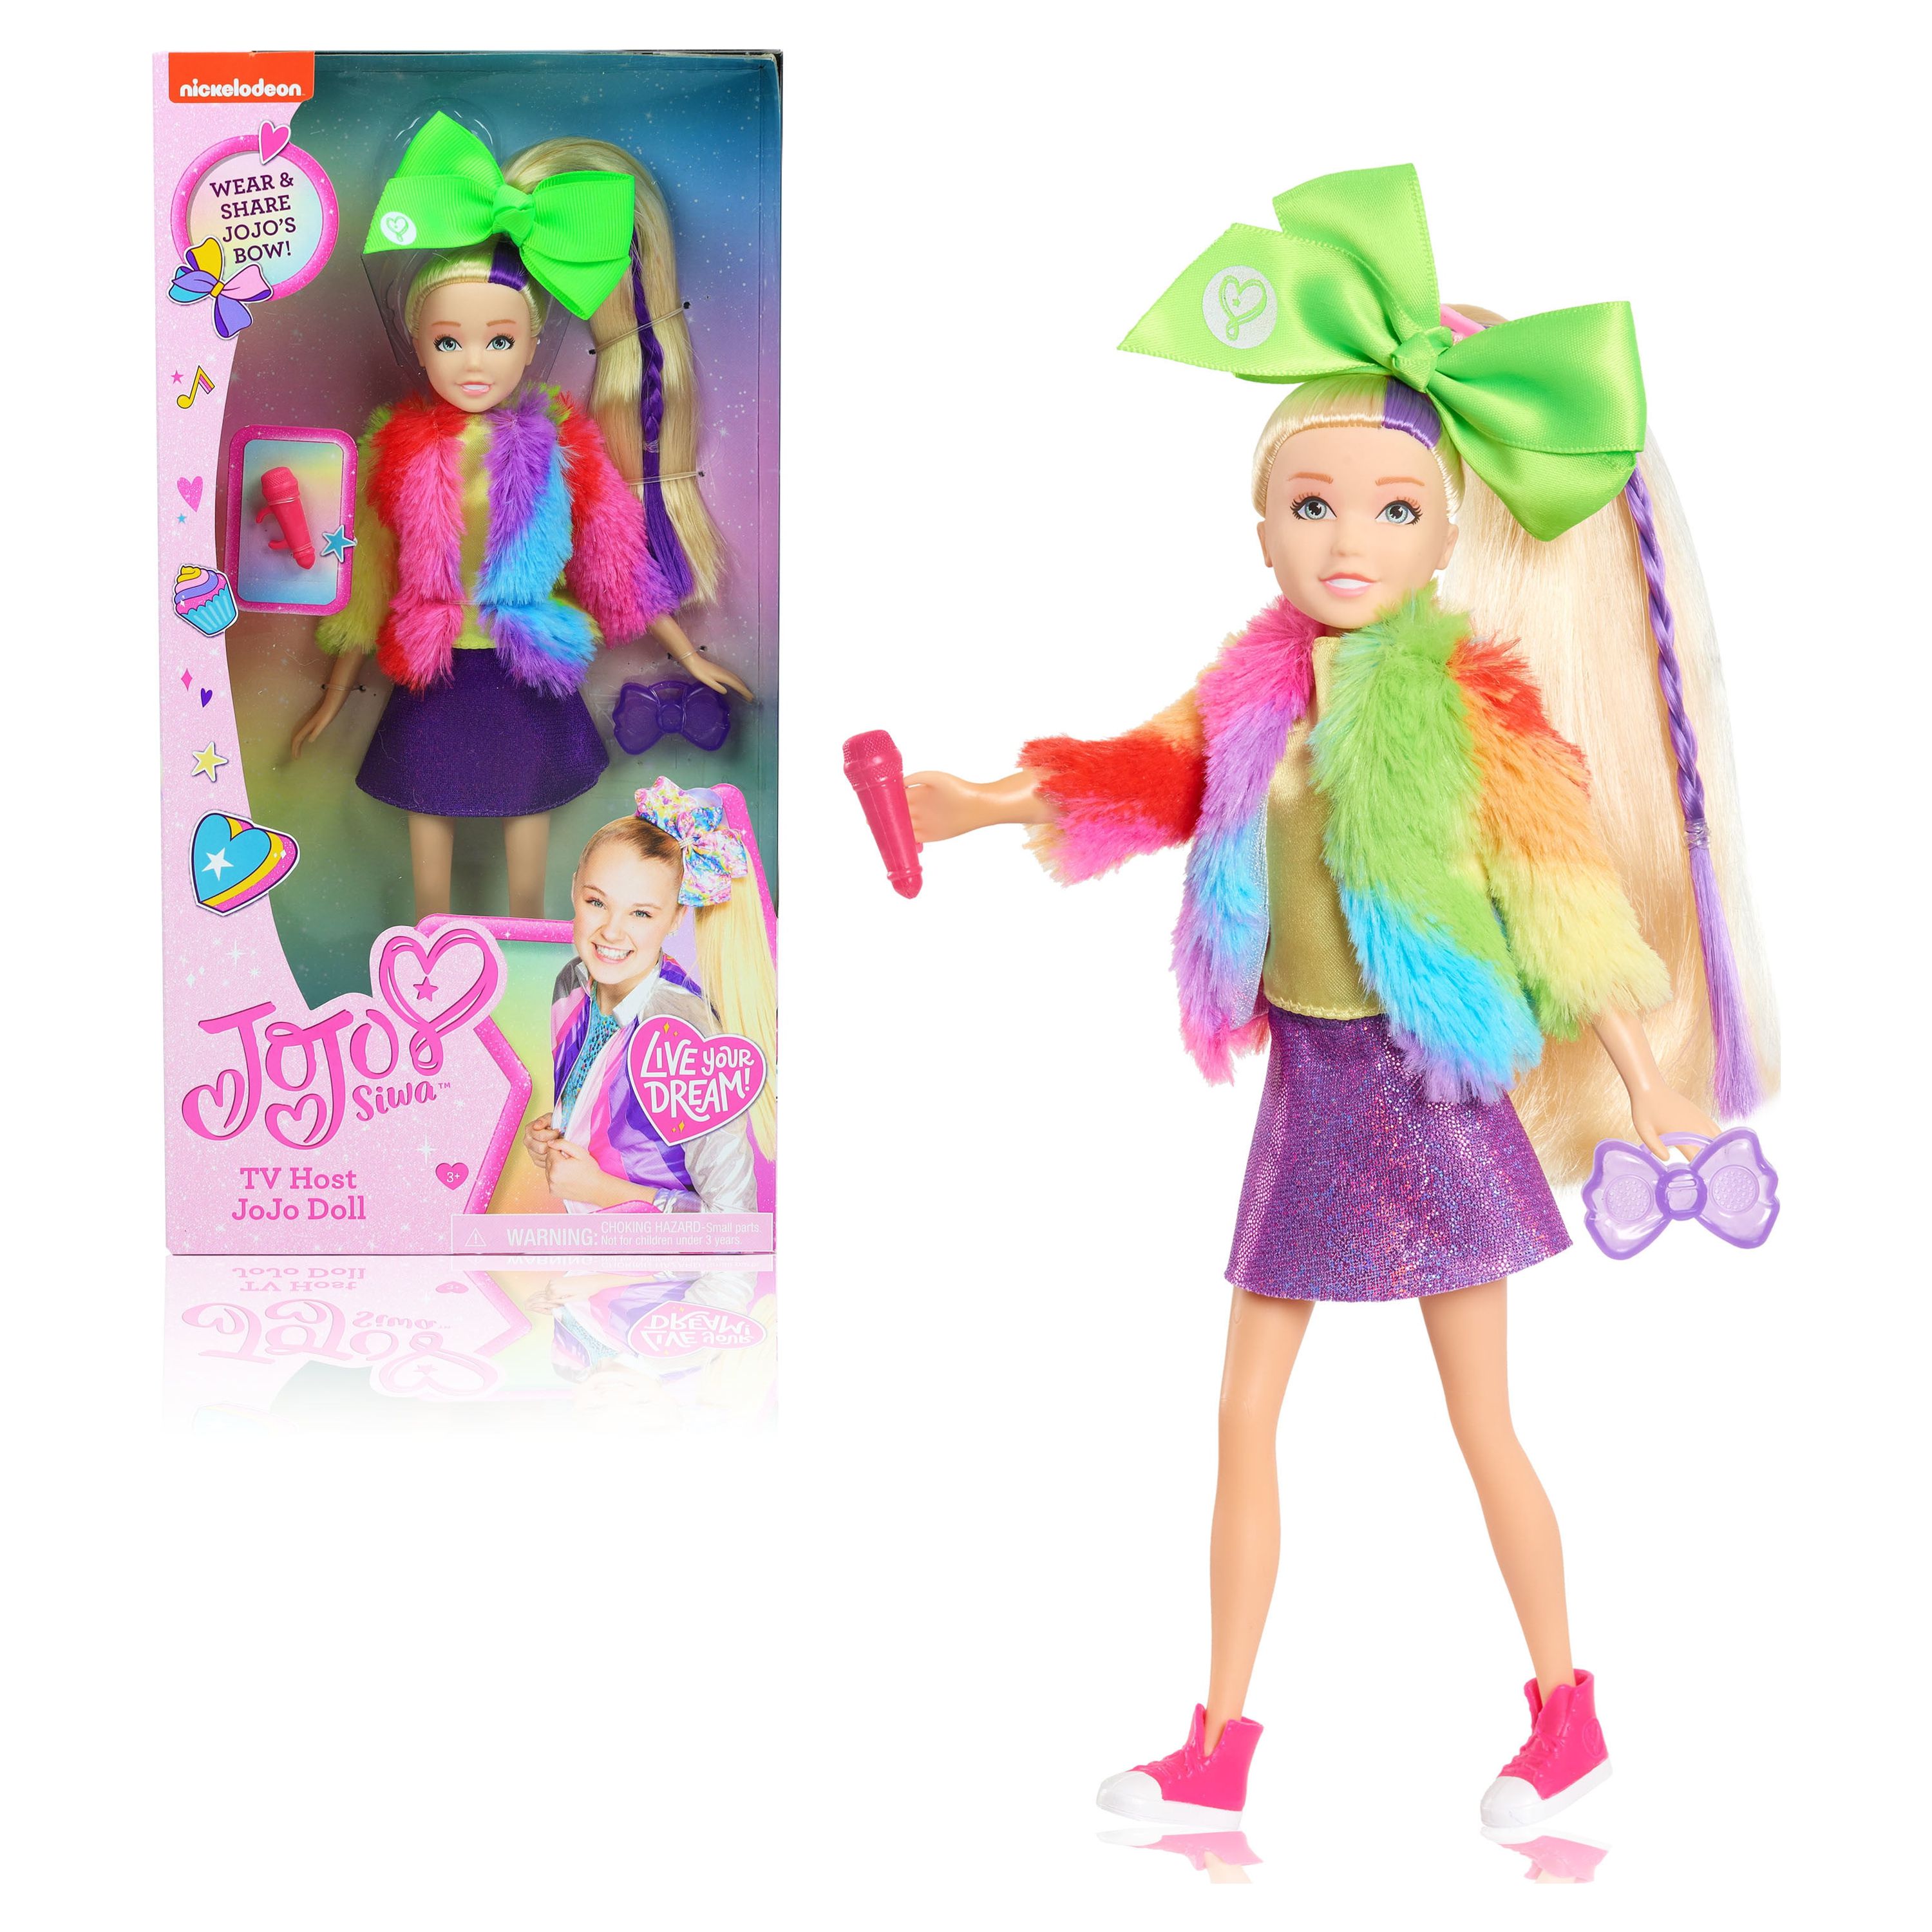 JoJo Siwa Fashion Doll, TV host, 10-inch doll,  Kids Toys for Ages 3 Up, Gifts and Presents - image 1 of 8